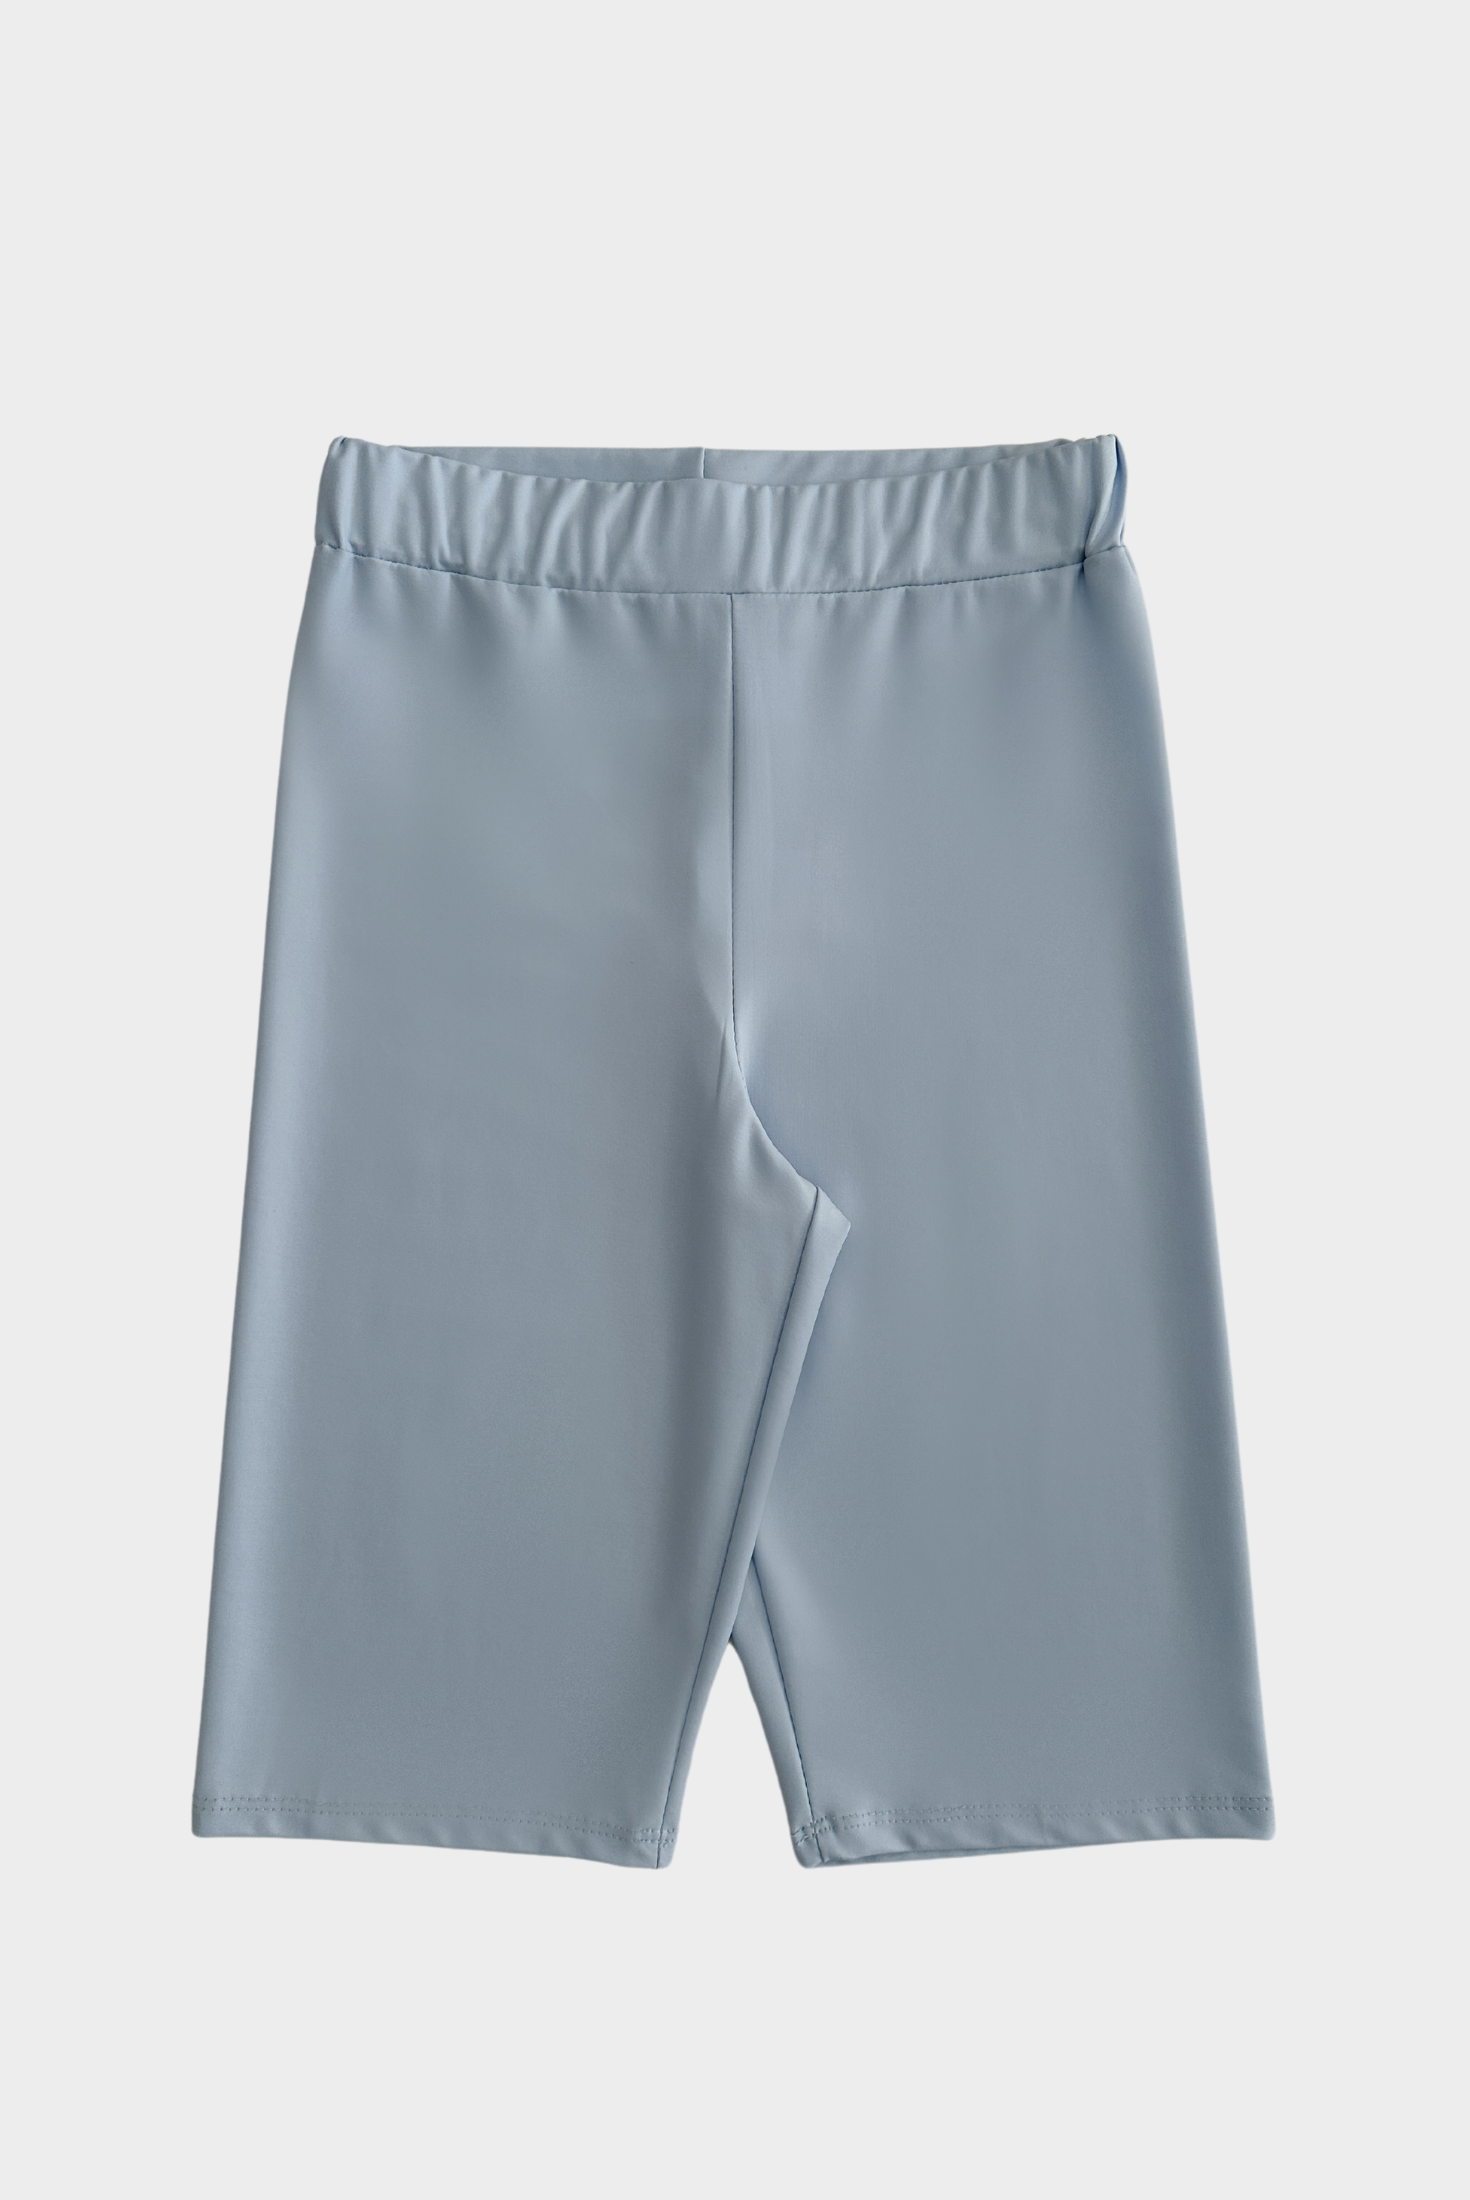 FAUX LEATHER LEGGING SHORTS IN LIGHT BLUE